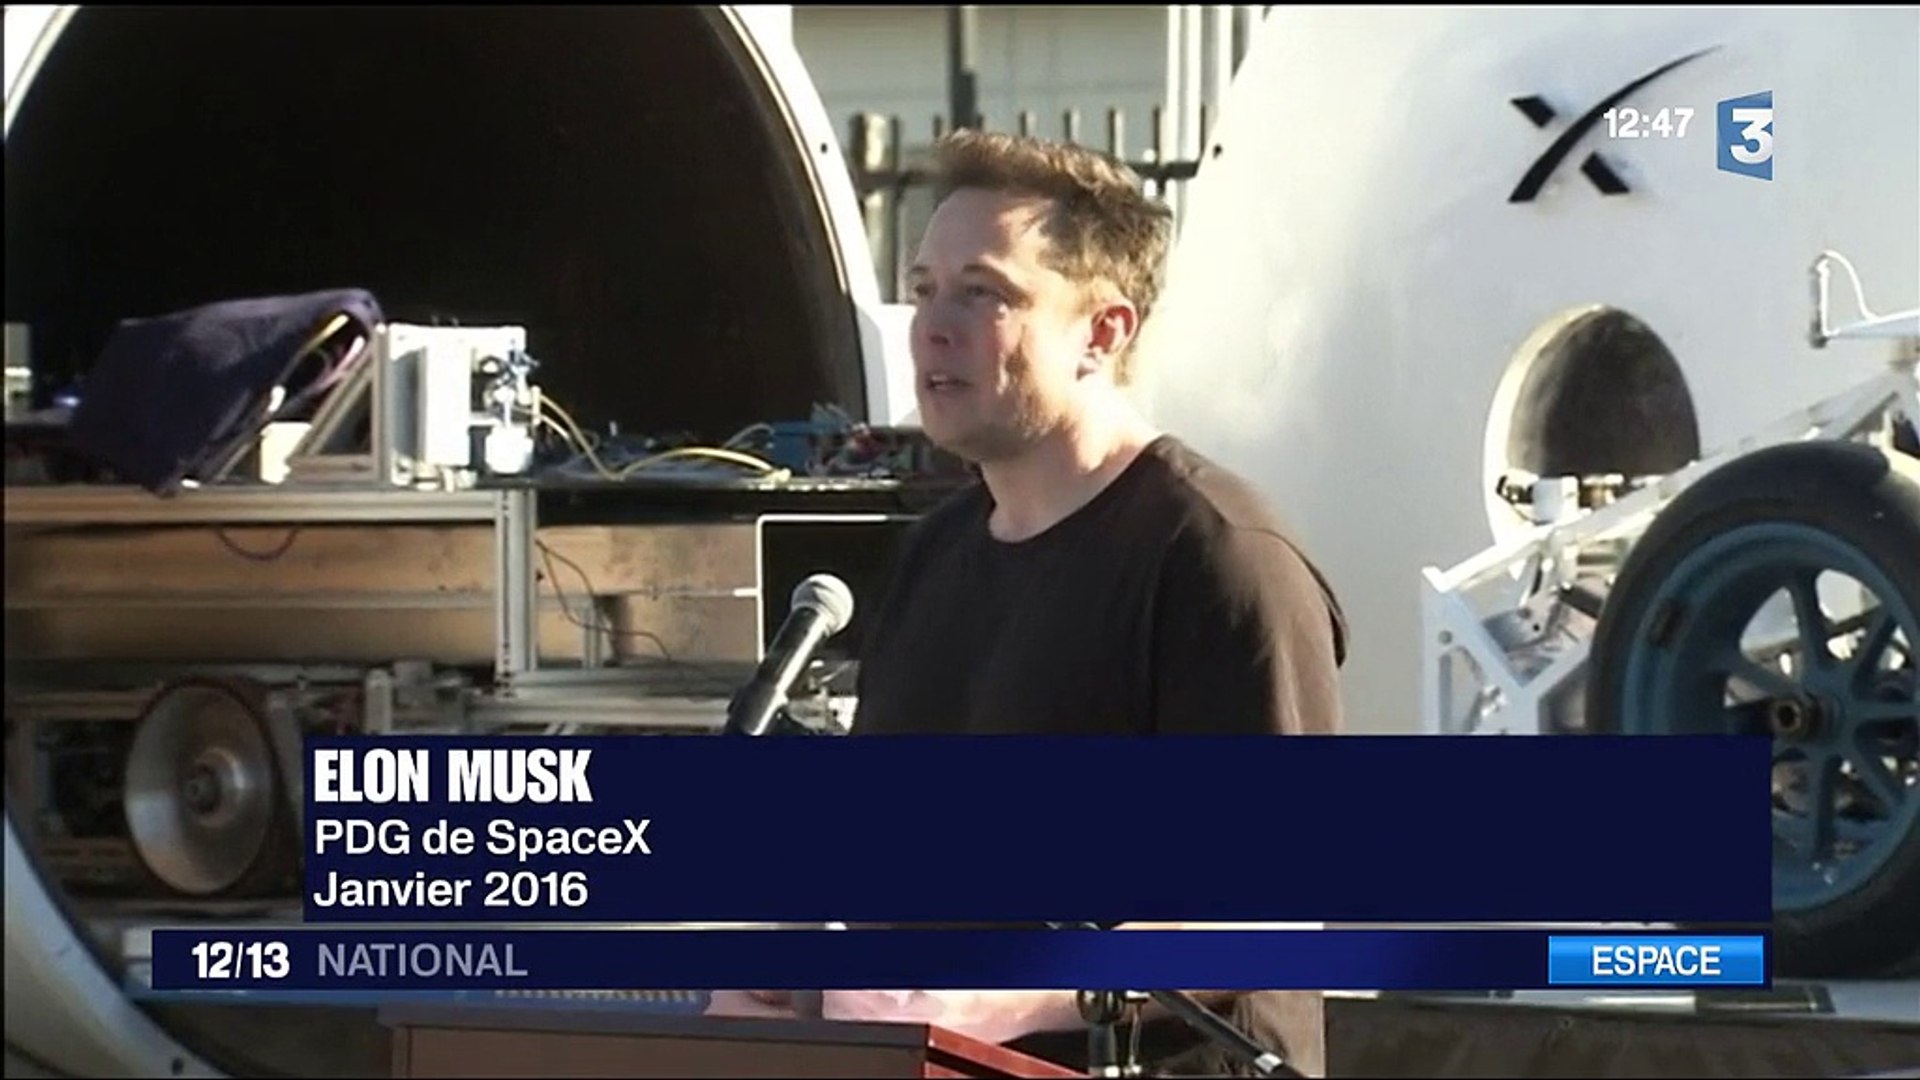 SpaceX is offering vacation packages for its employees. These packages include both in-person and on